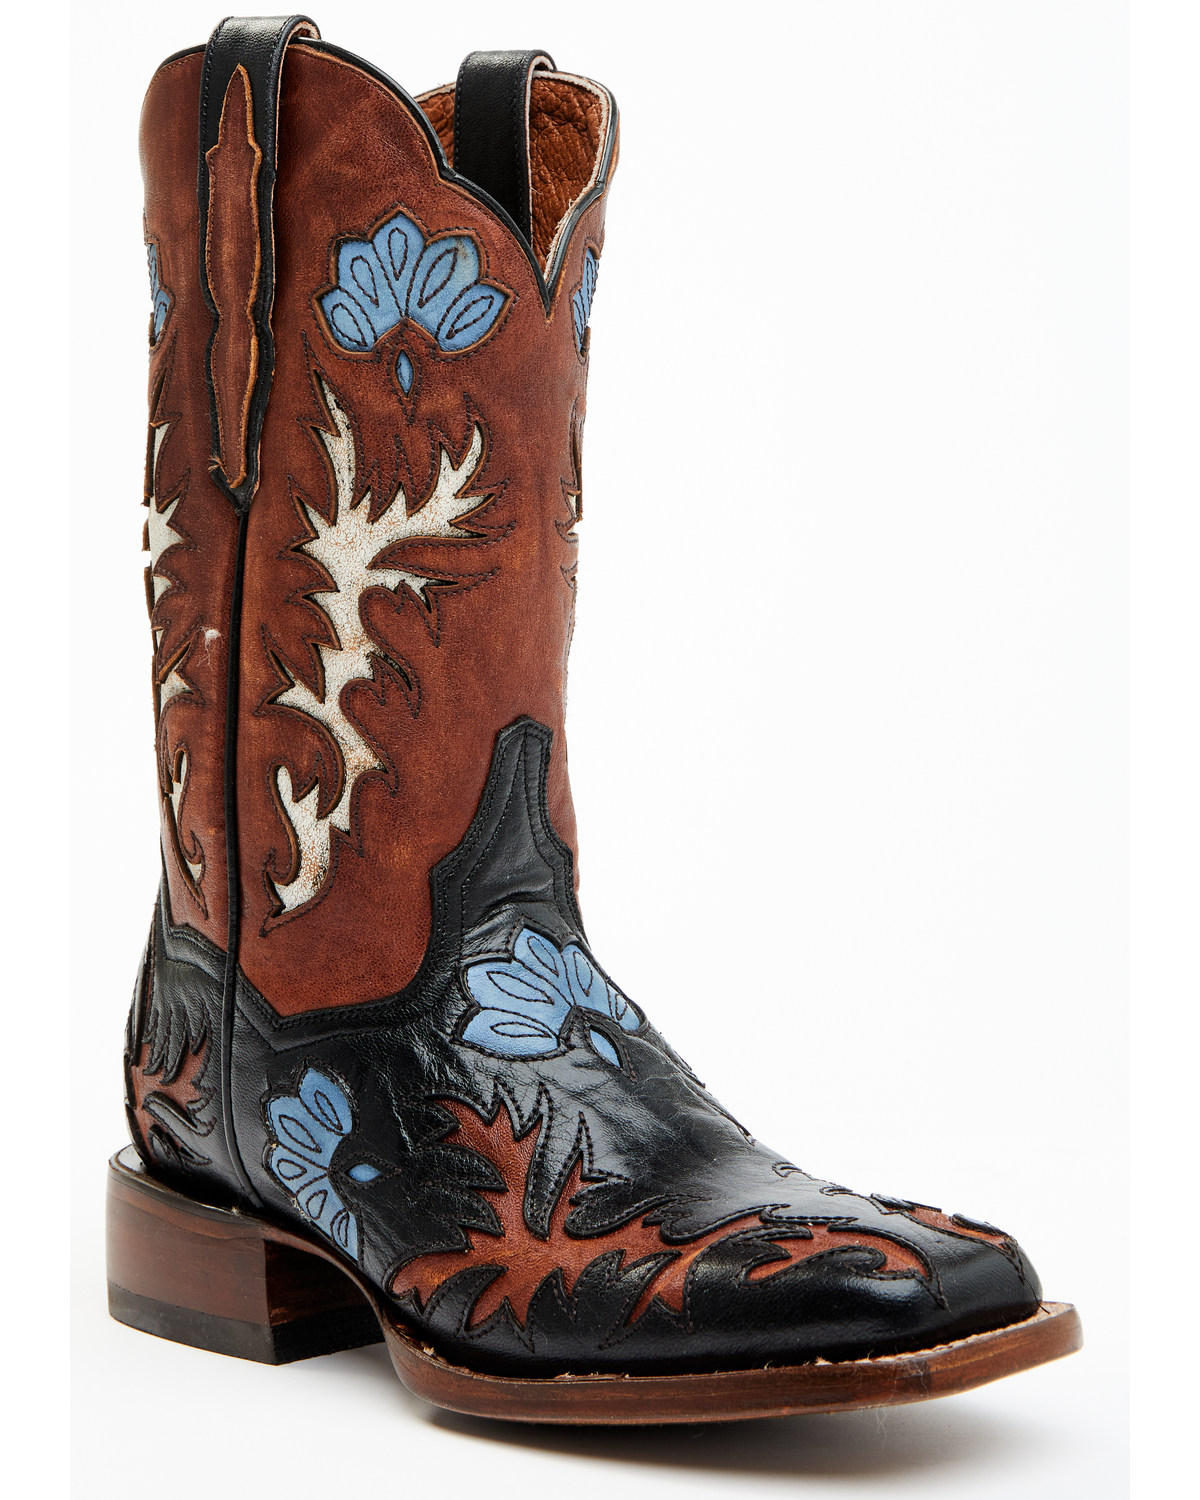 Dan Post Women's Tamarind Floral Leather Western Boots - Broad Square Toe